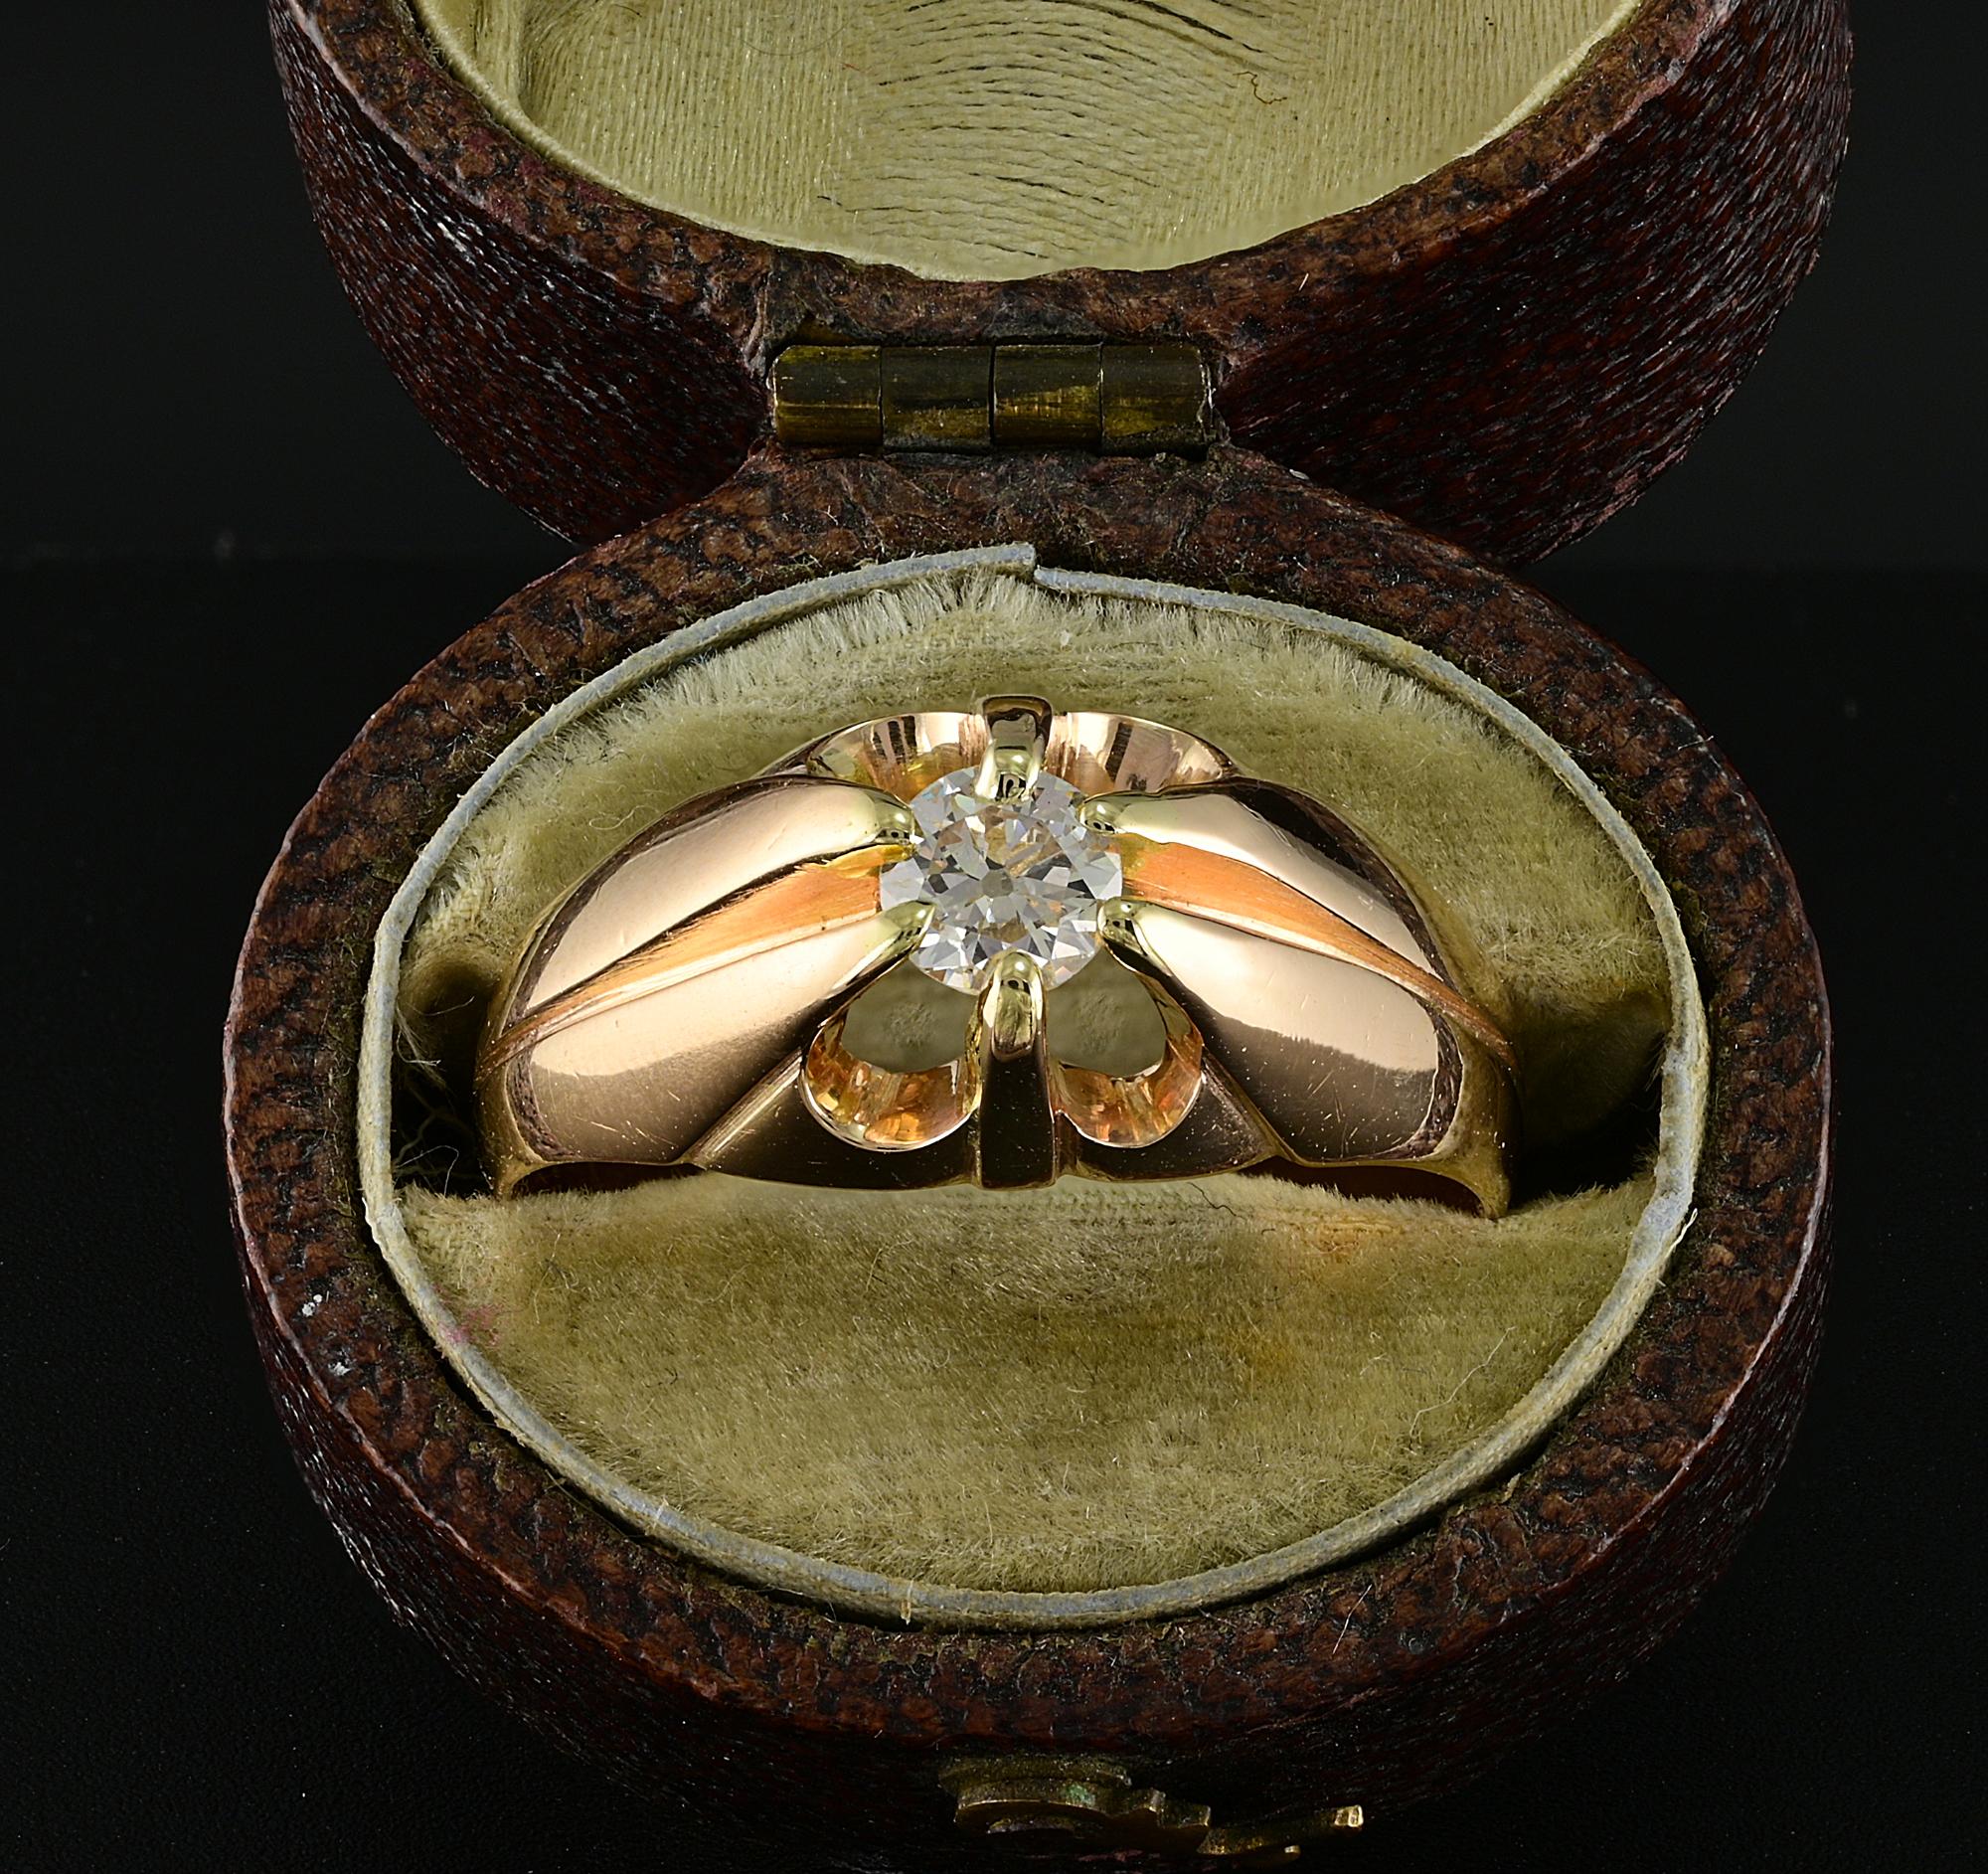 A fine Victorian period Diamond solitaire ring, 1900 ca
Hand crafted of 15 KT gold
Traditional setting designed in the classy Victorian Gent multiclaw setting
Centrally set with an old European cut Diamond rated G VS, full of fire and